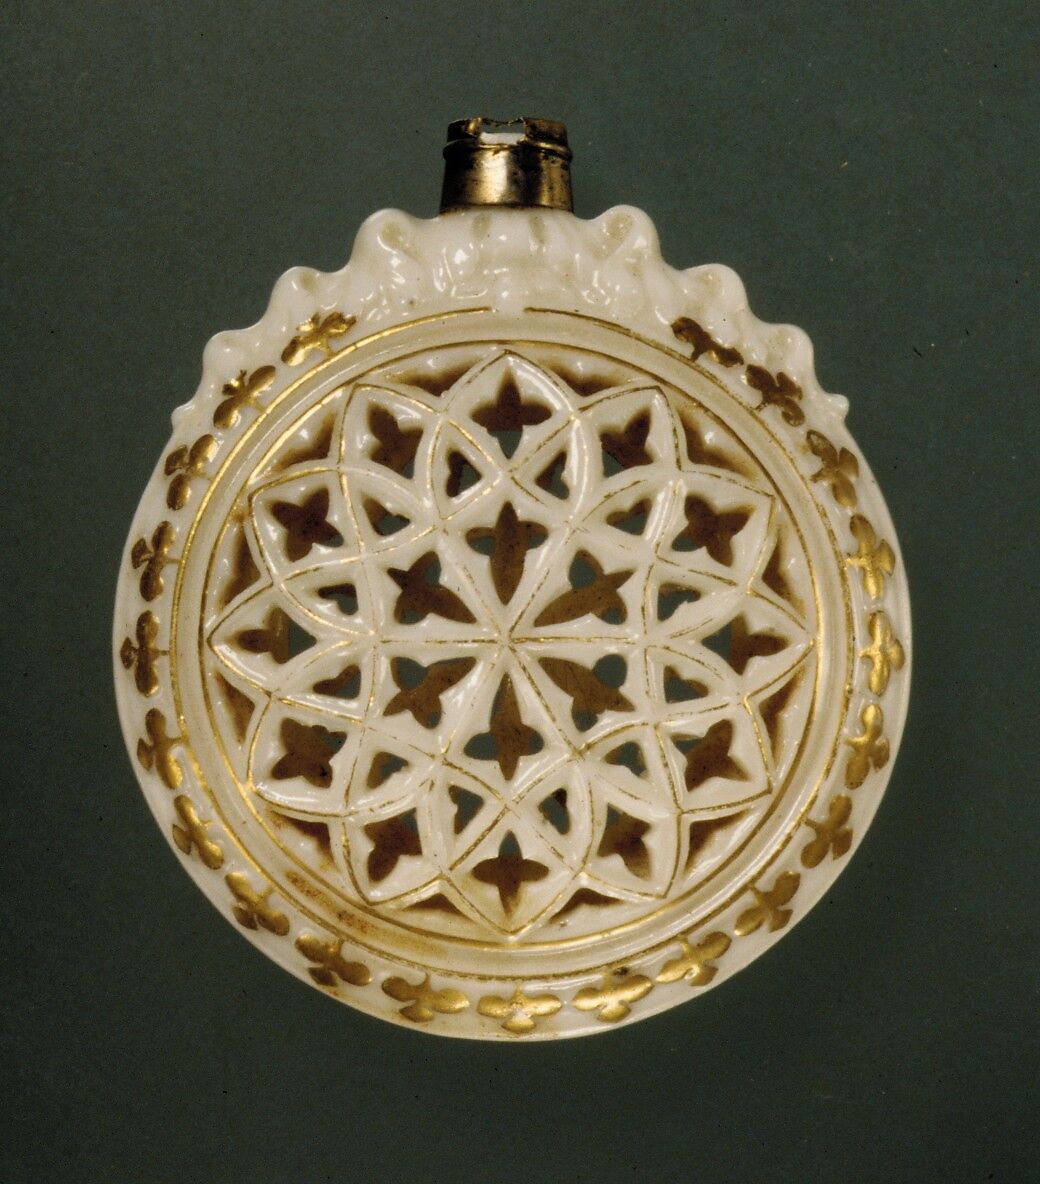 Perfume flask, Probably Willets Manufacturing Company (1879–1908), Porcelain, American 